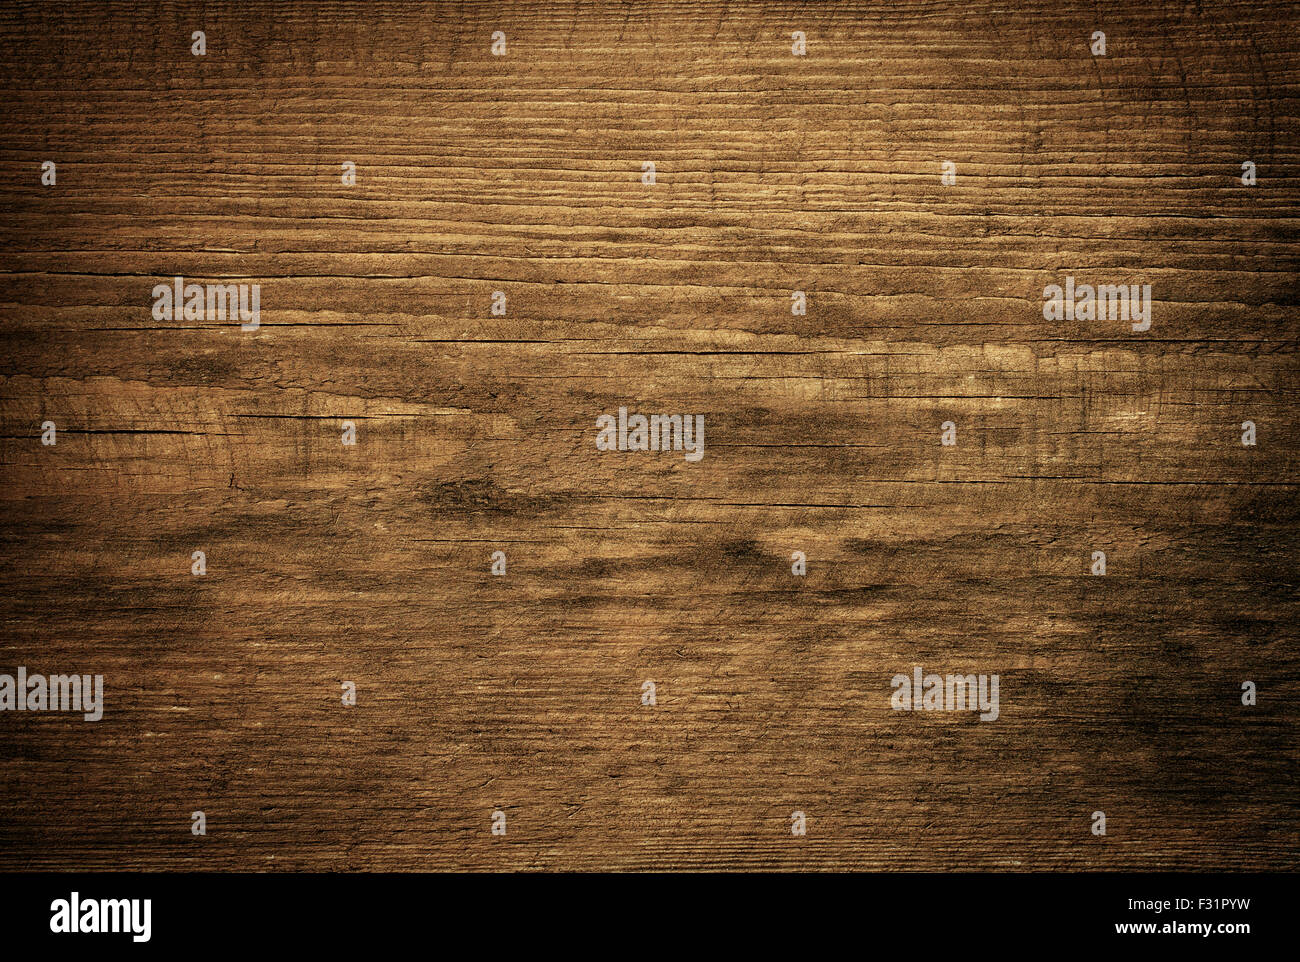 Dark brown scratched wooden cutting board. Wood texture Stock Photo